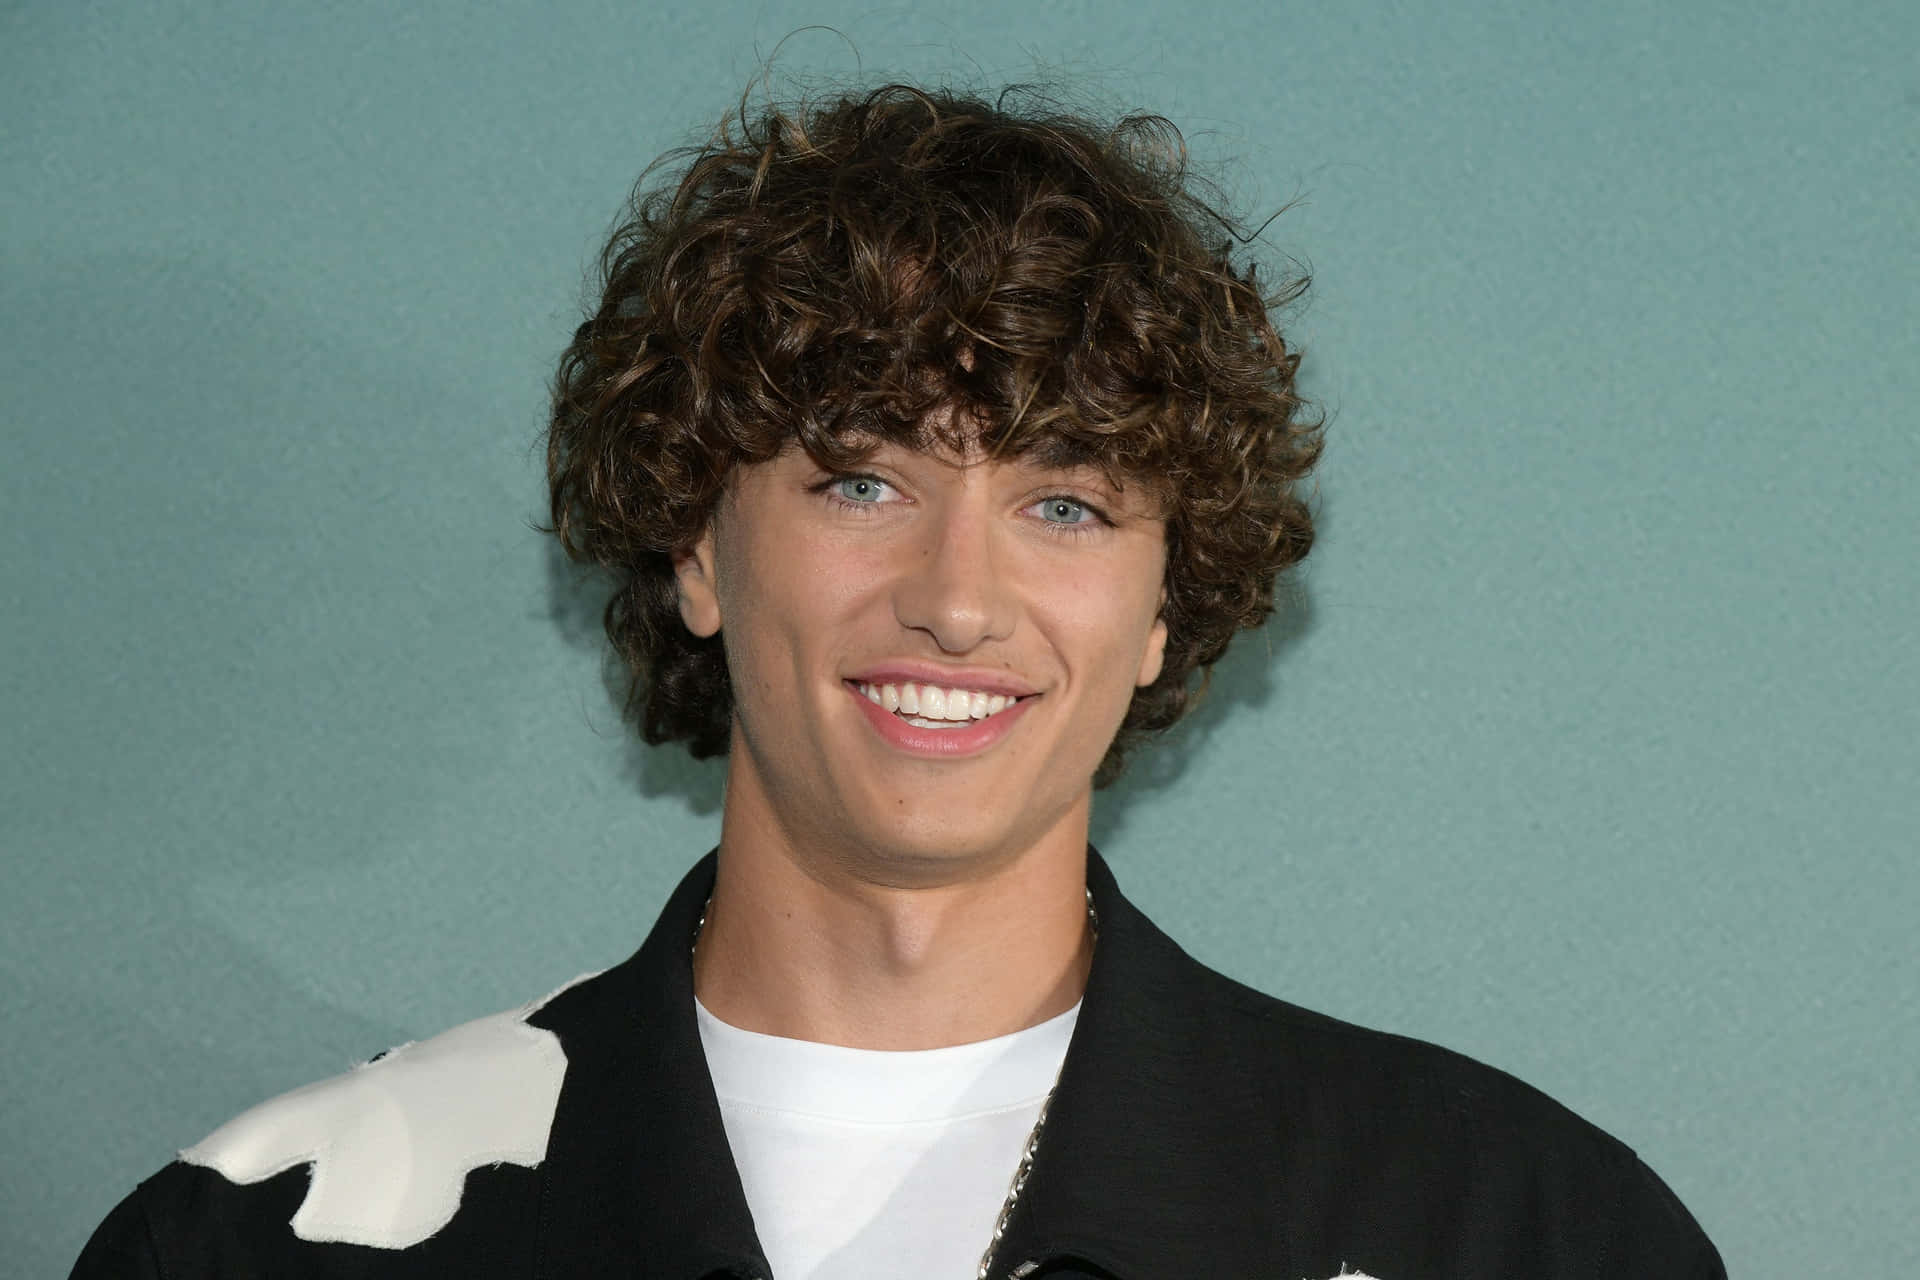 Curly Haired Man Smiling At Event Background